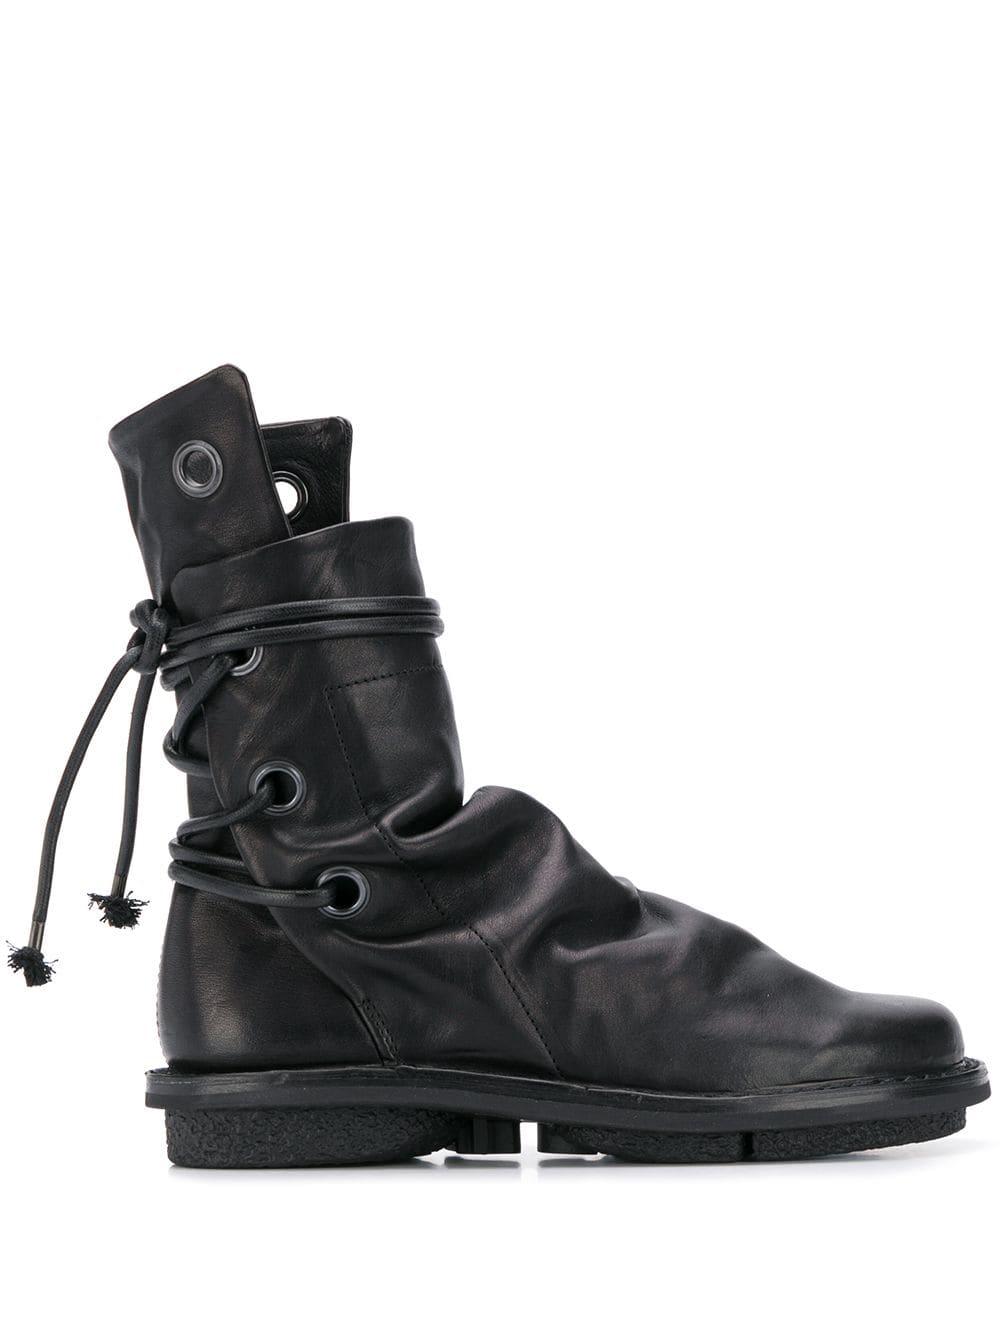 Trippen Leather Awning Boots in Black - Lyst